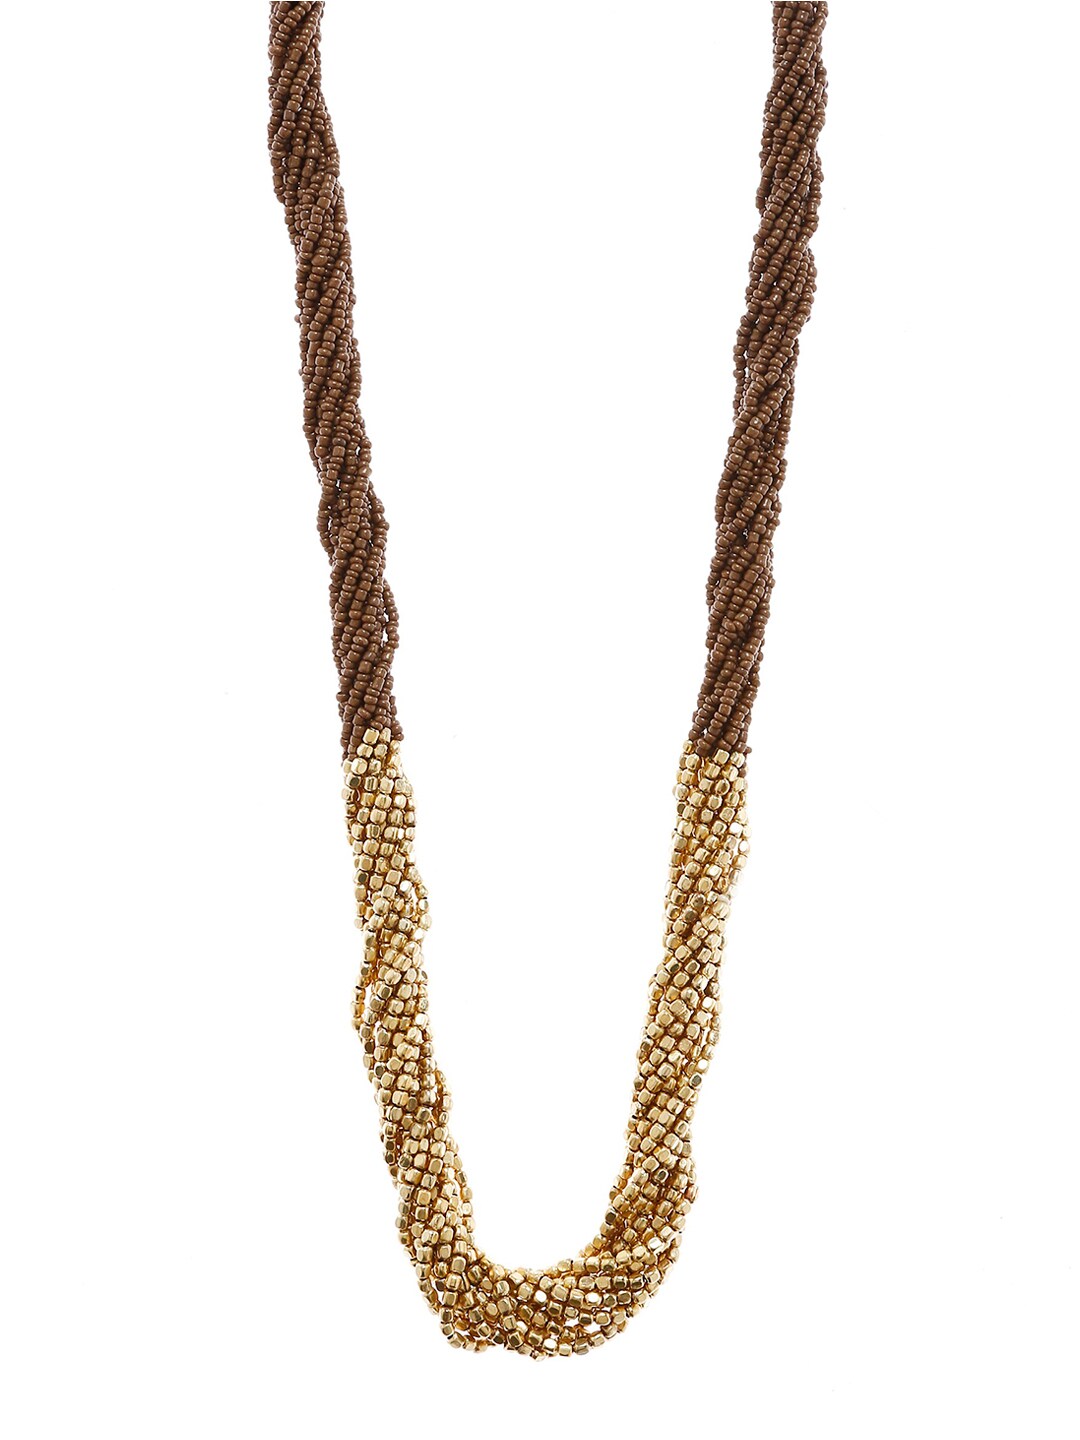 Bamboo Tree Jewels Brown & Gold-Toned Metal Handcrafted Necklace Price in India